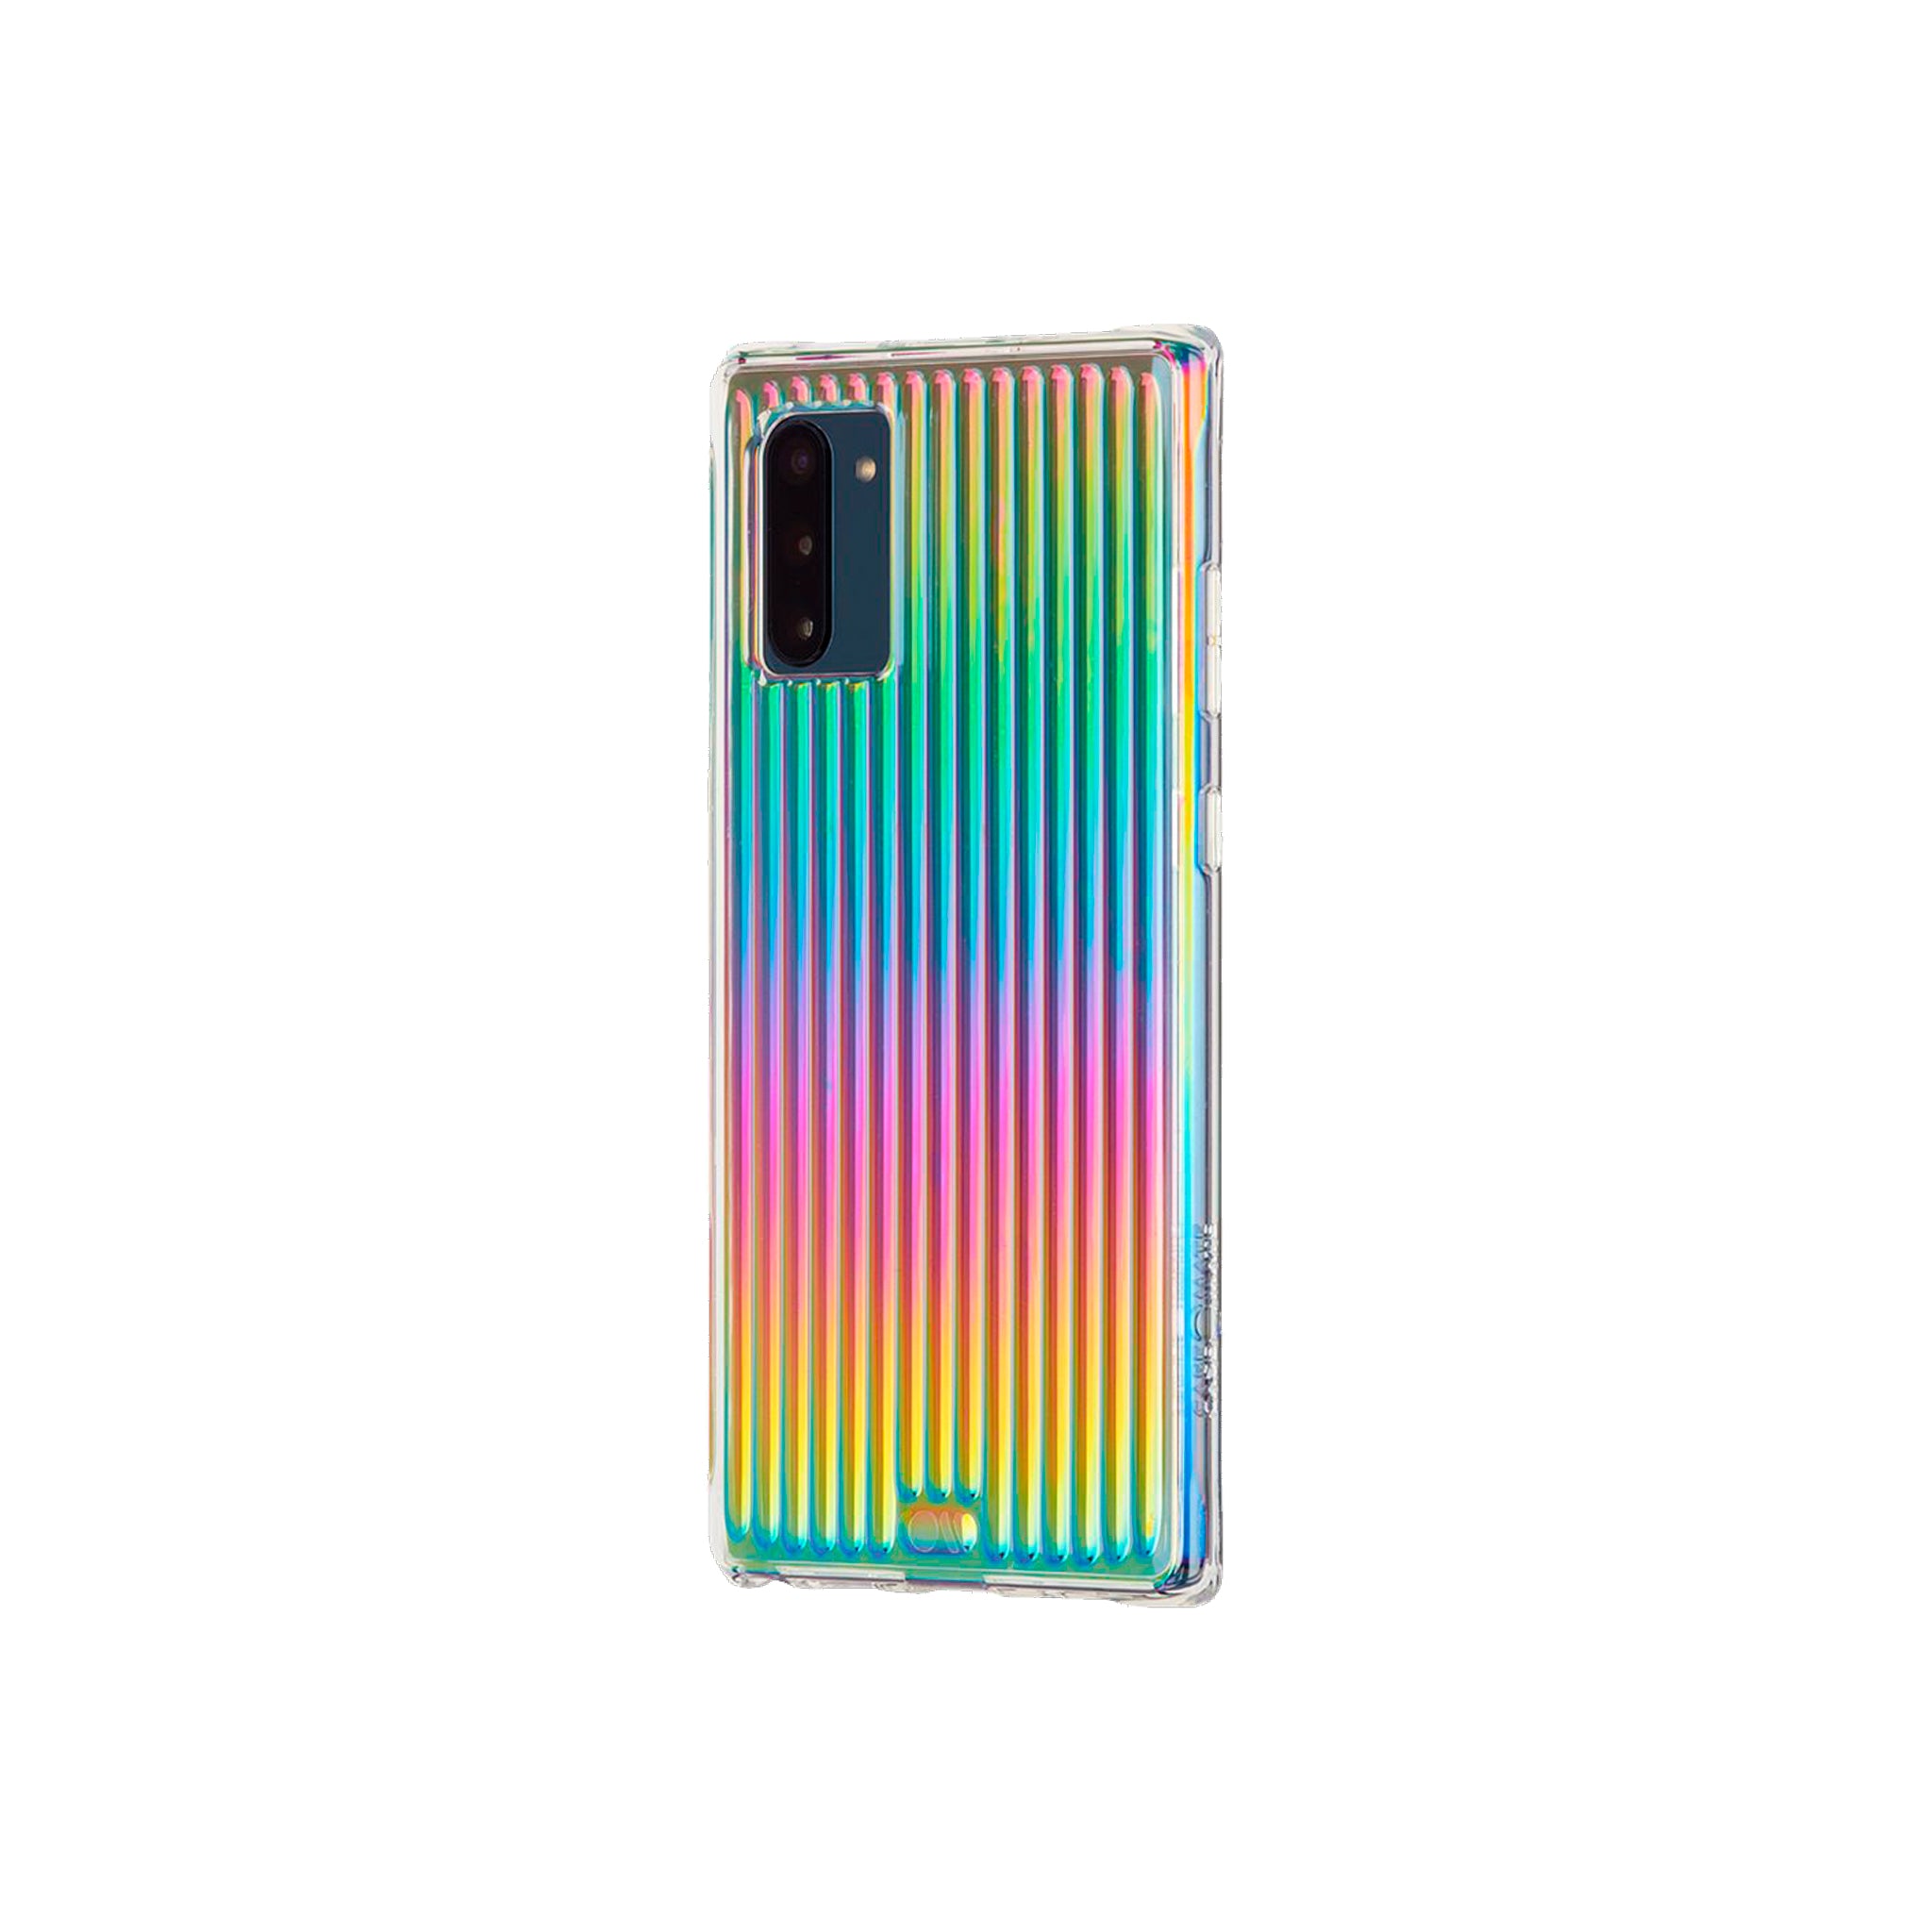 Case-mate - Tough Groove Case For Samsung Galaxy Note 10 - Iridescent